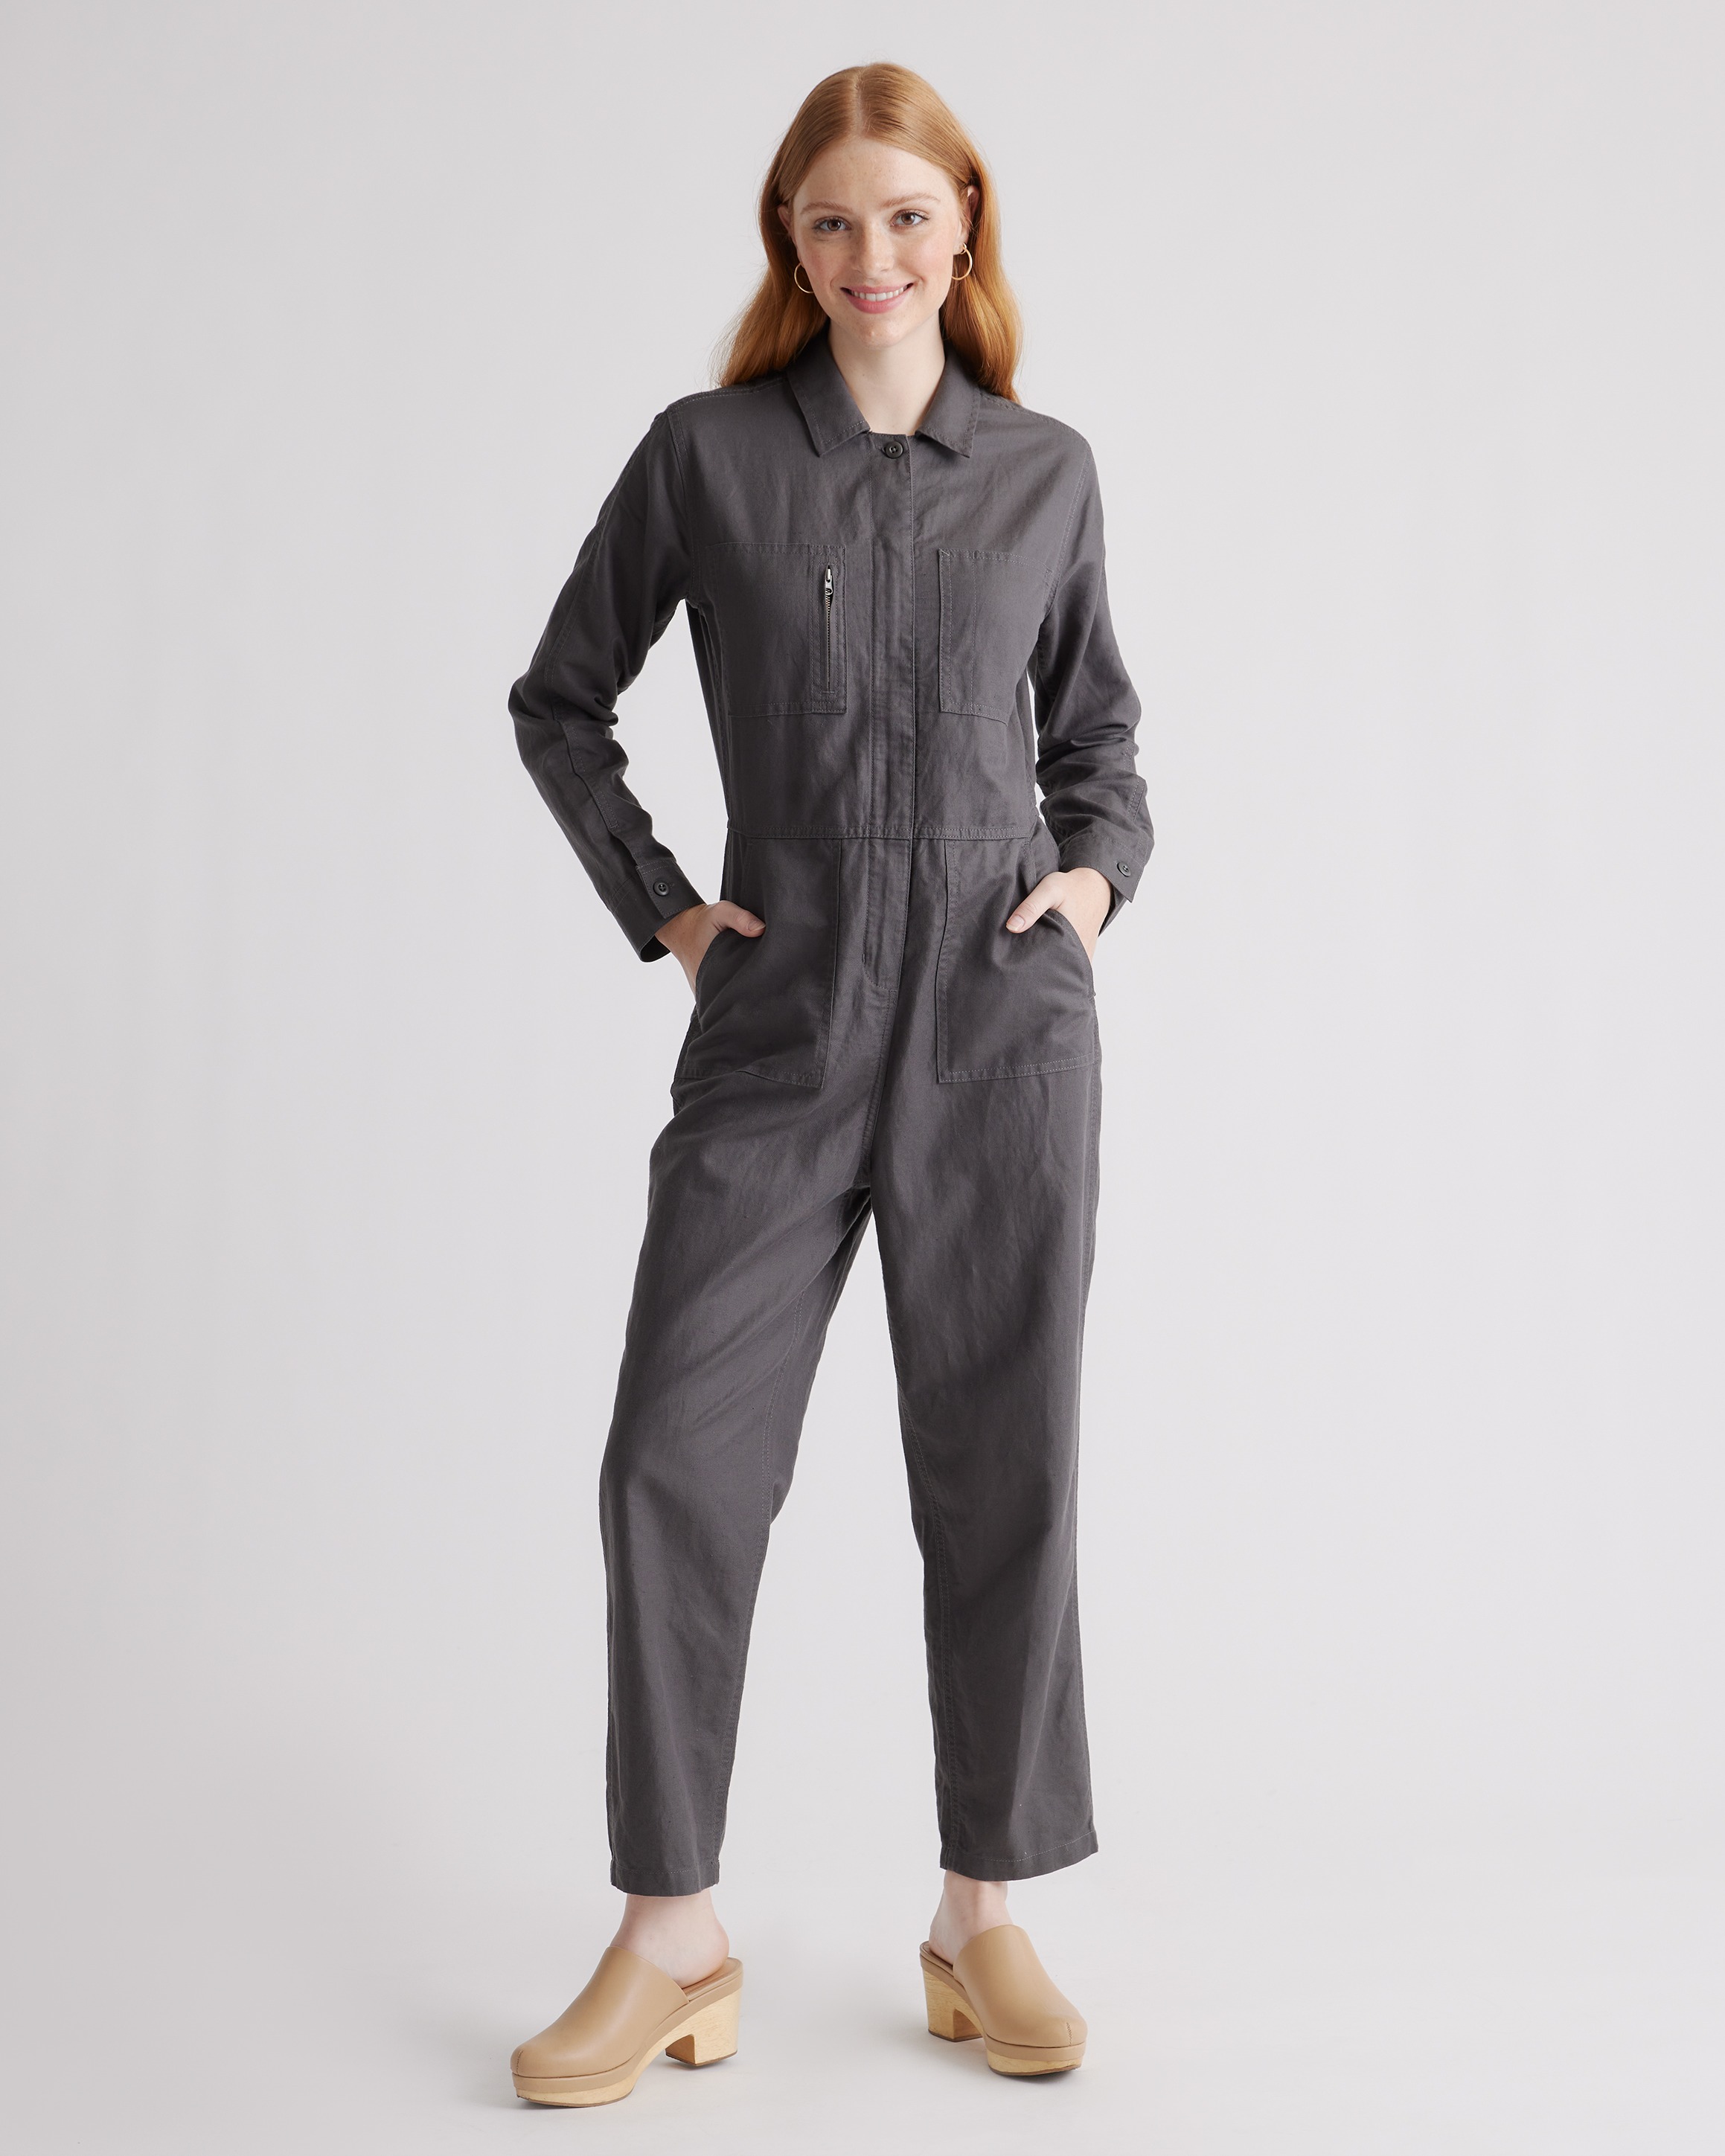 Cotton Linen Twill Long Sleeve Coverall Jumpsuit